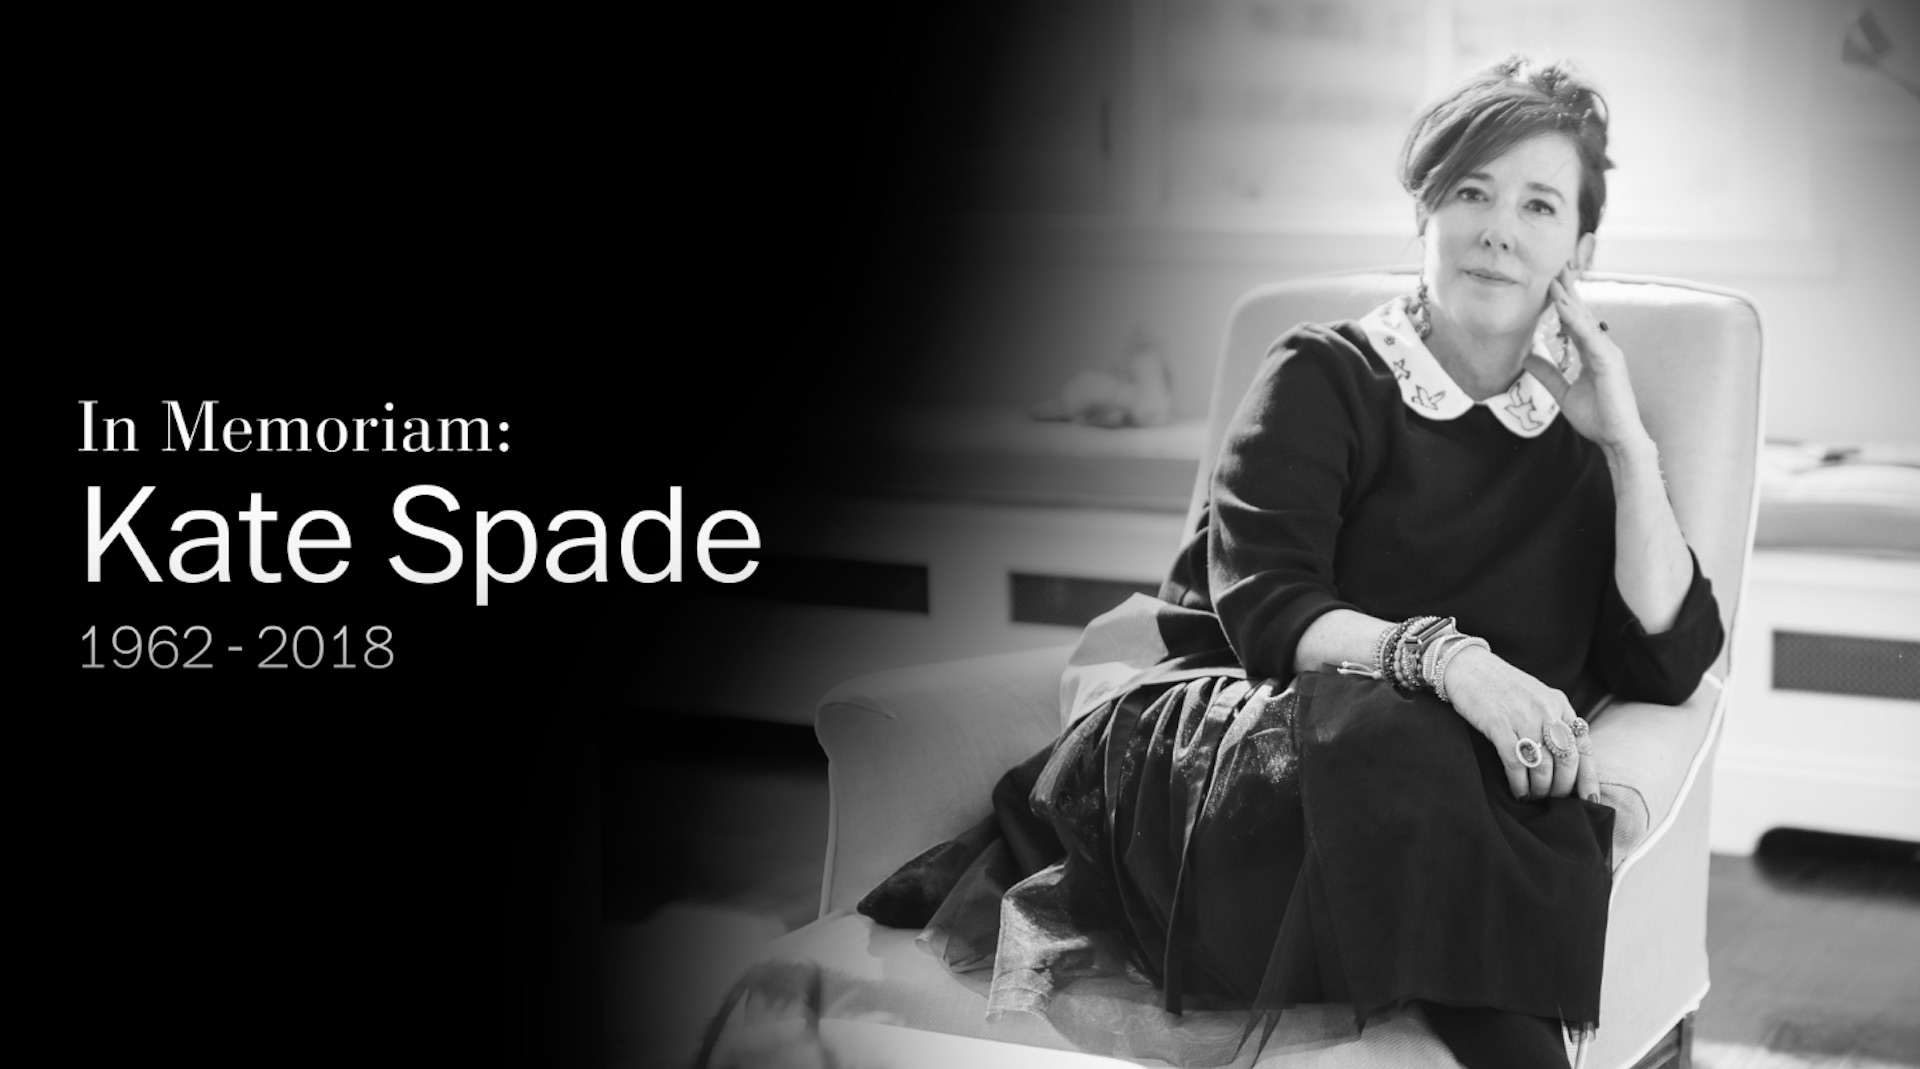 Kate Spade obituary: Fashion designer dies at 55 of apparent suicide - The  Washington Post